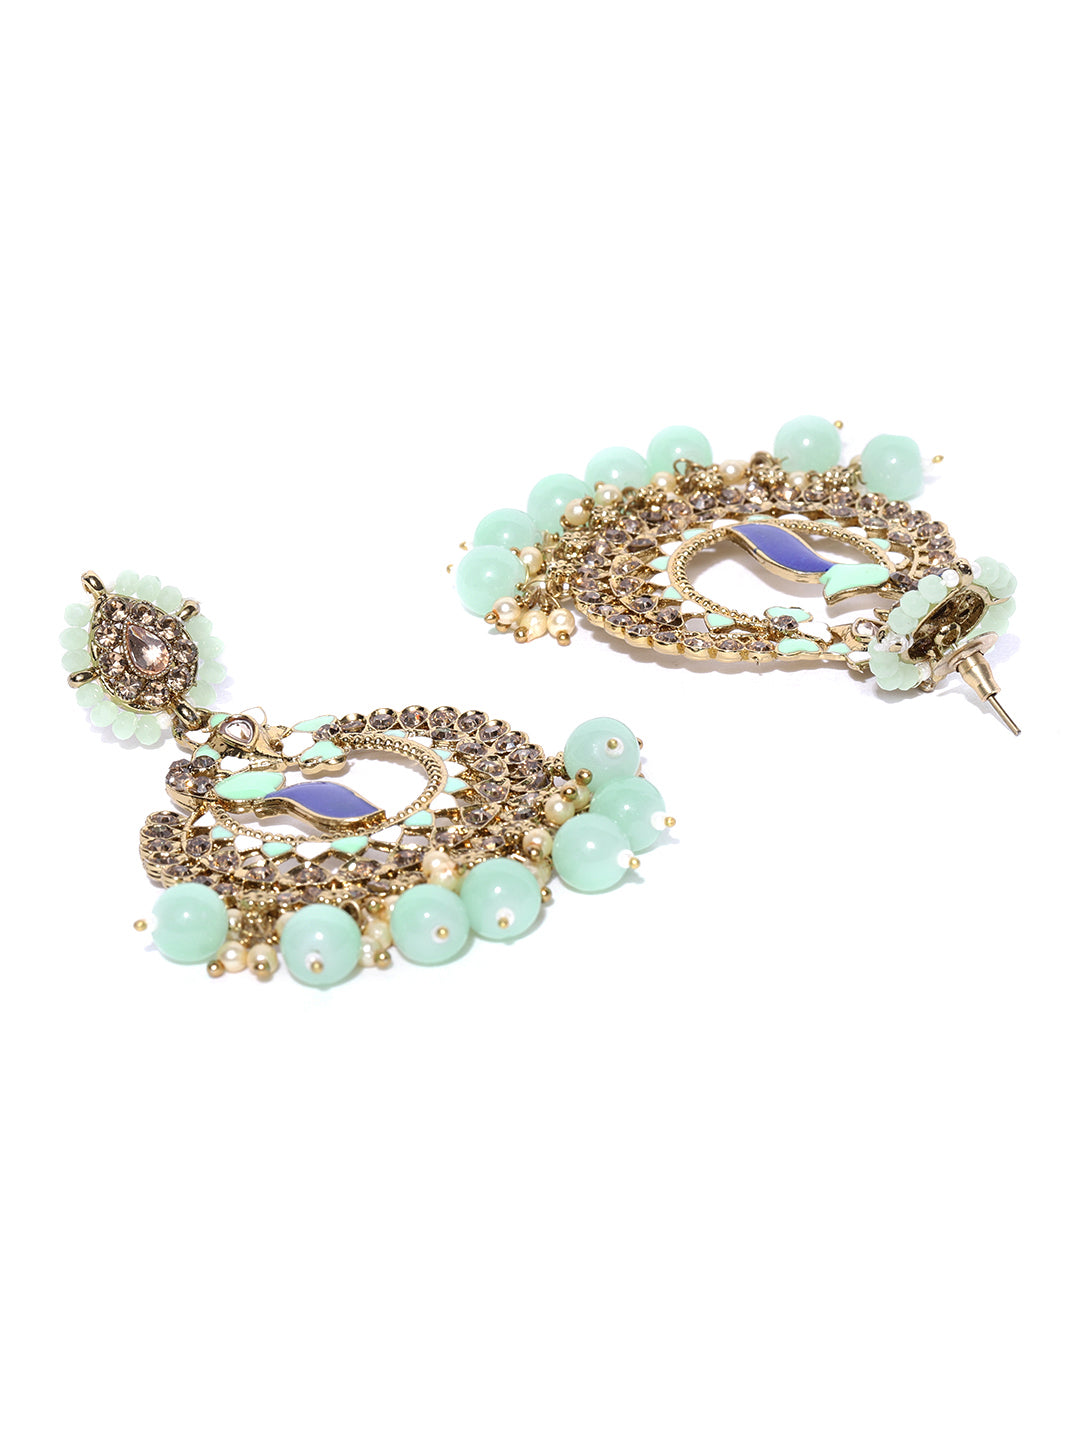 Gold-Plated Stones Studded Peacock Inspired Chandbali Earrings in Mint Green and Blue Color with Beads Drop